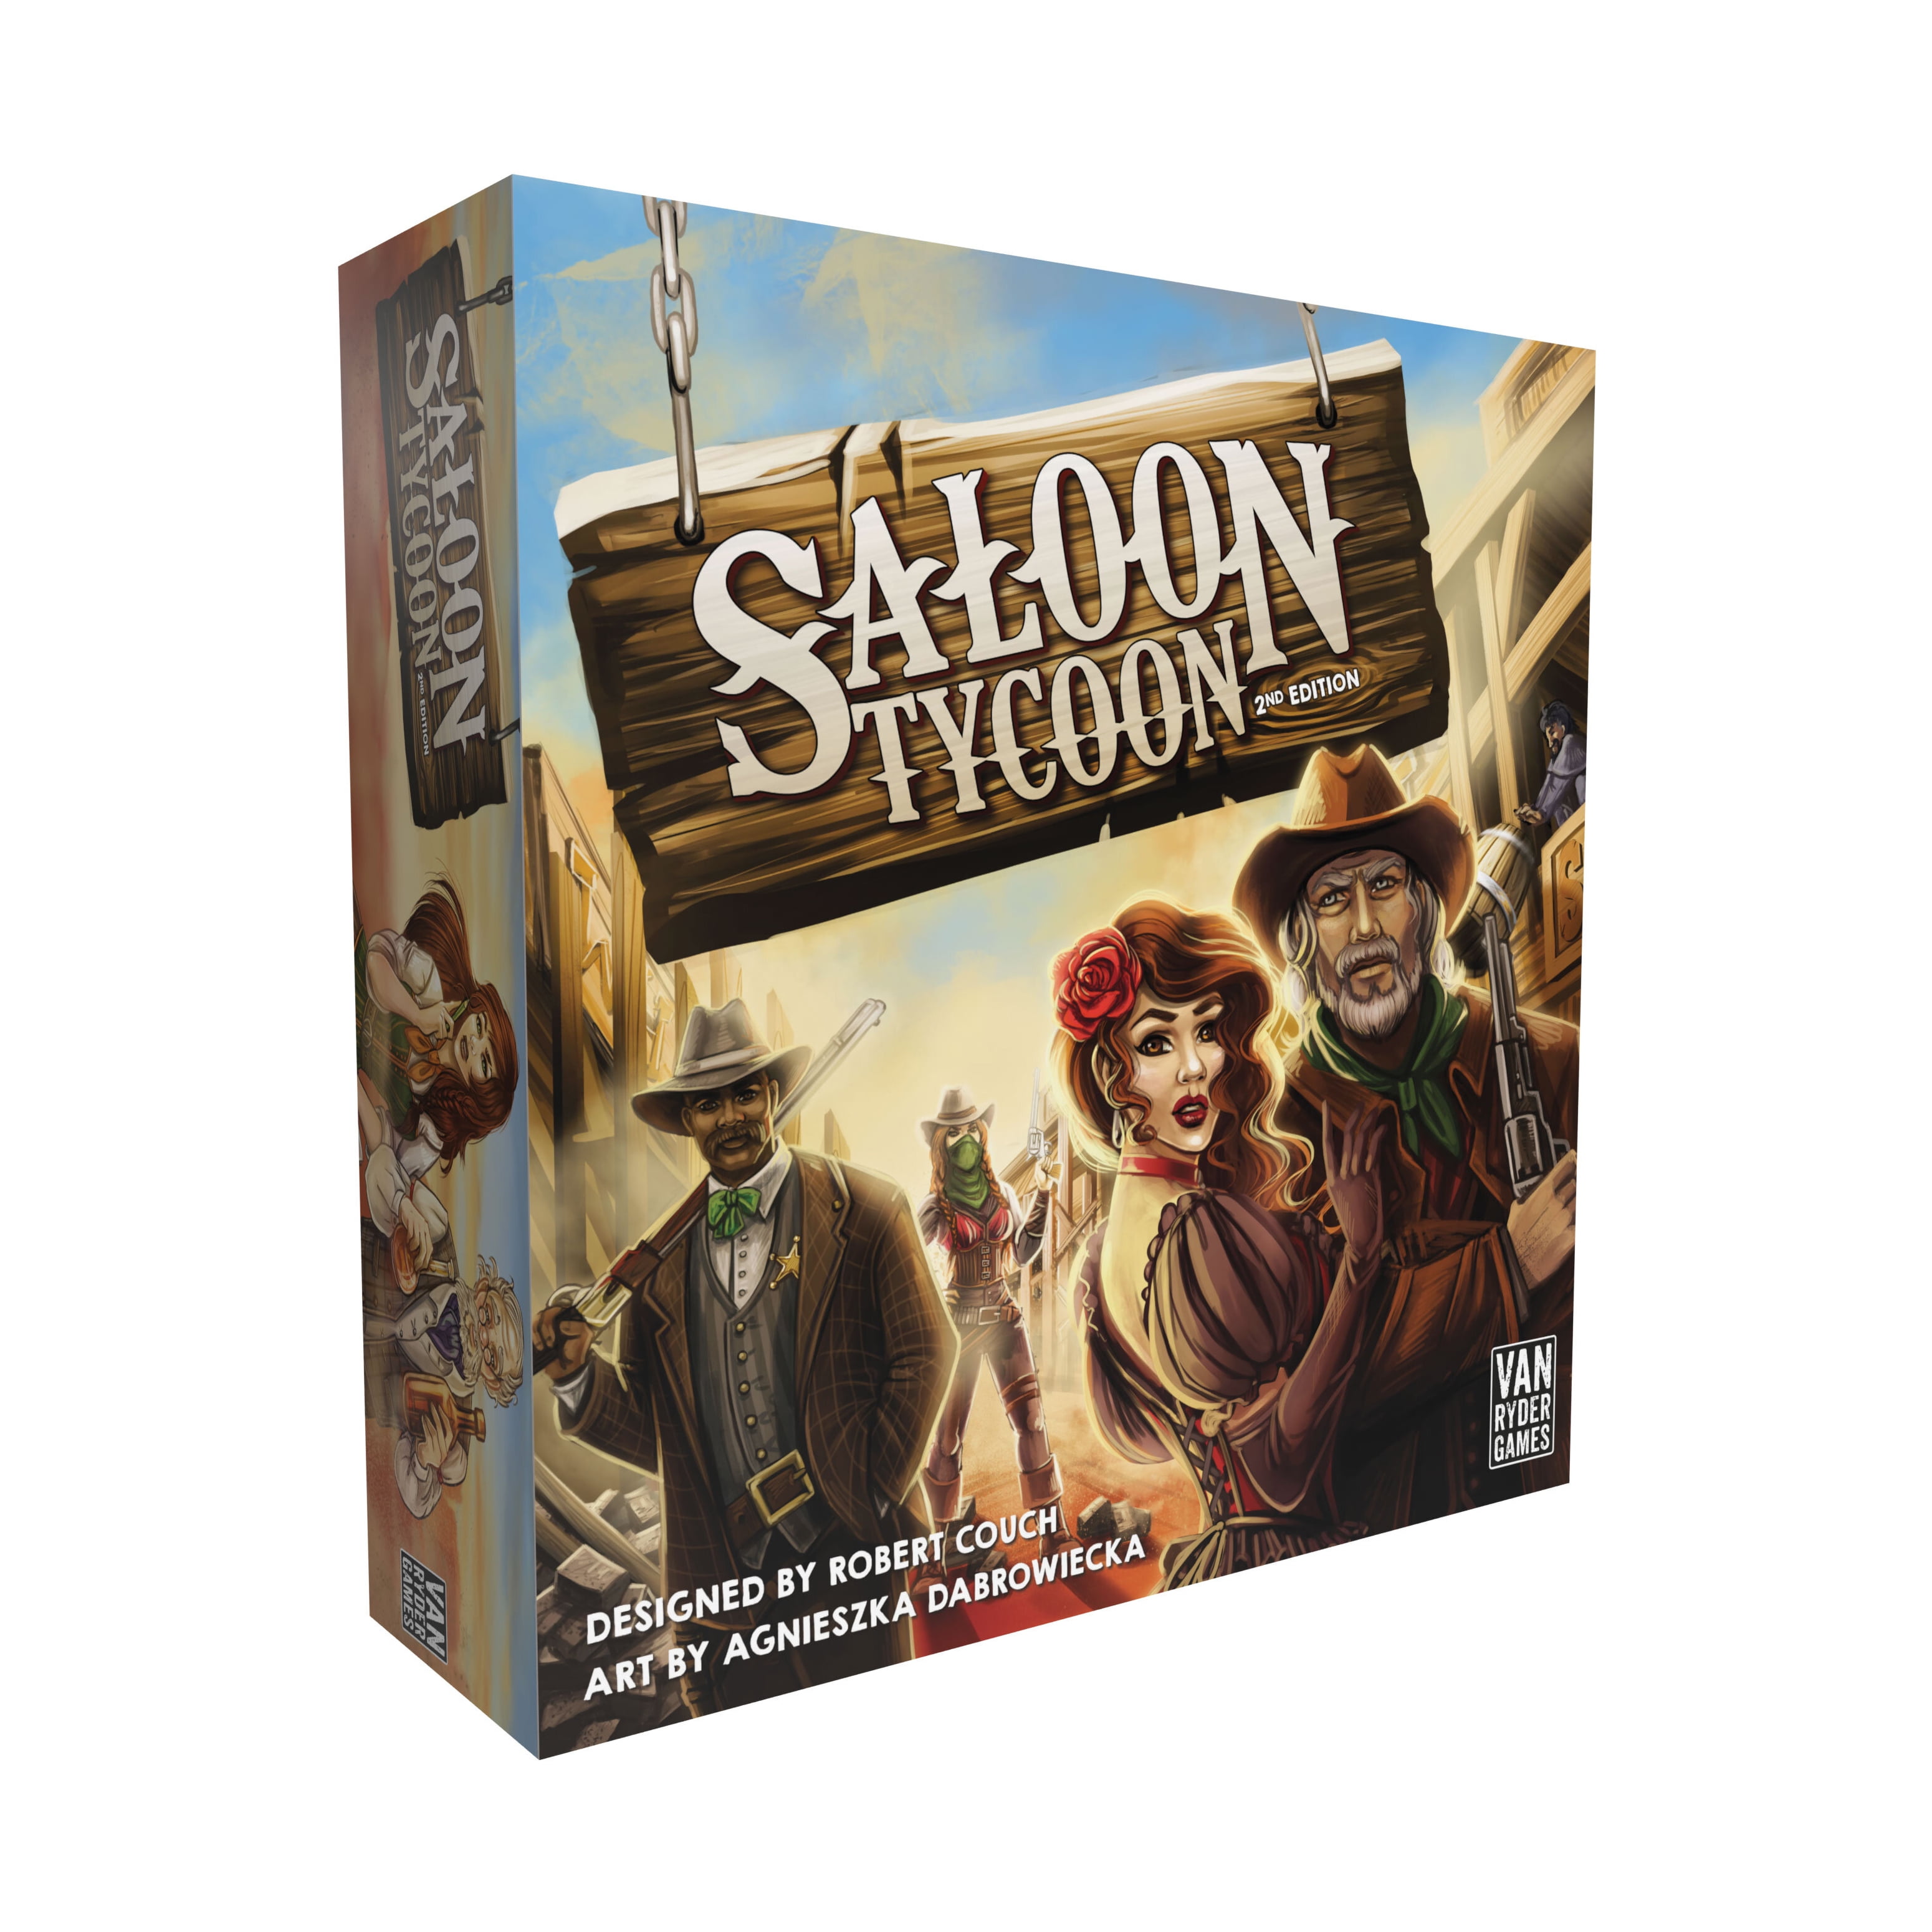 Picture of Van Ryder Games VRG0052 Saloon Tycoon 2nd Edition Board Games